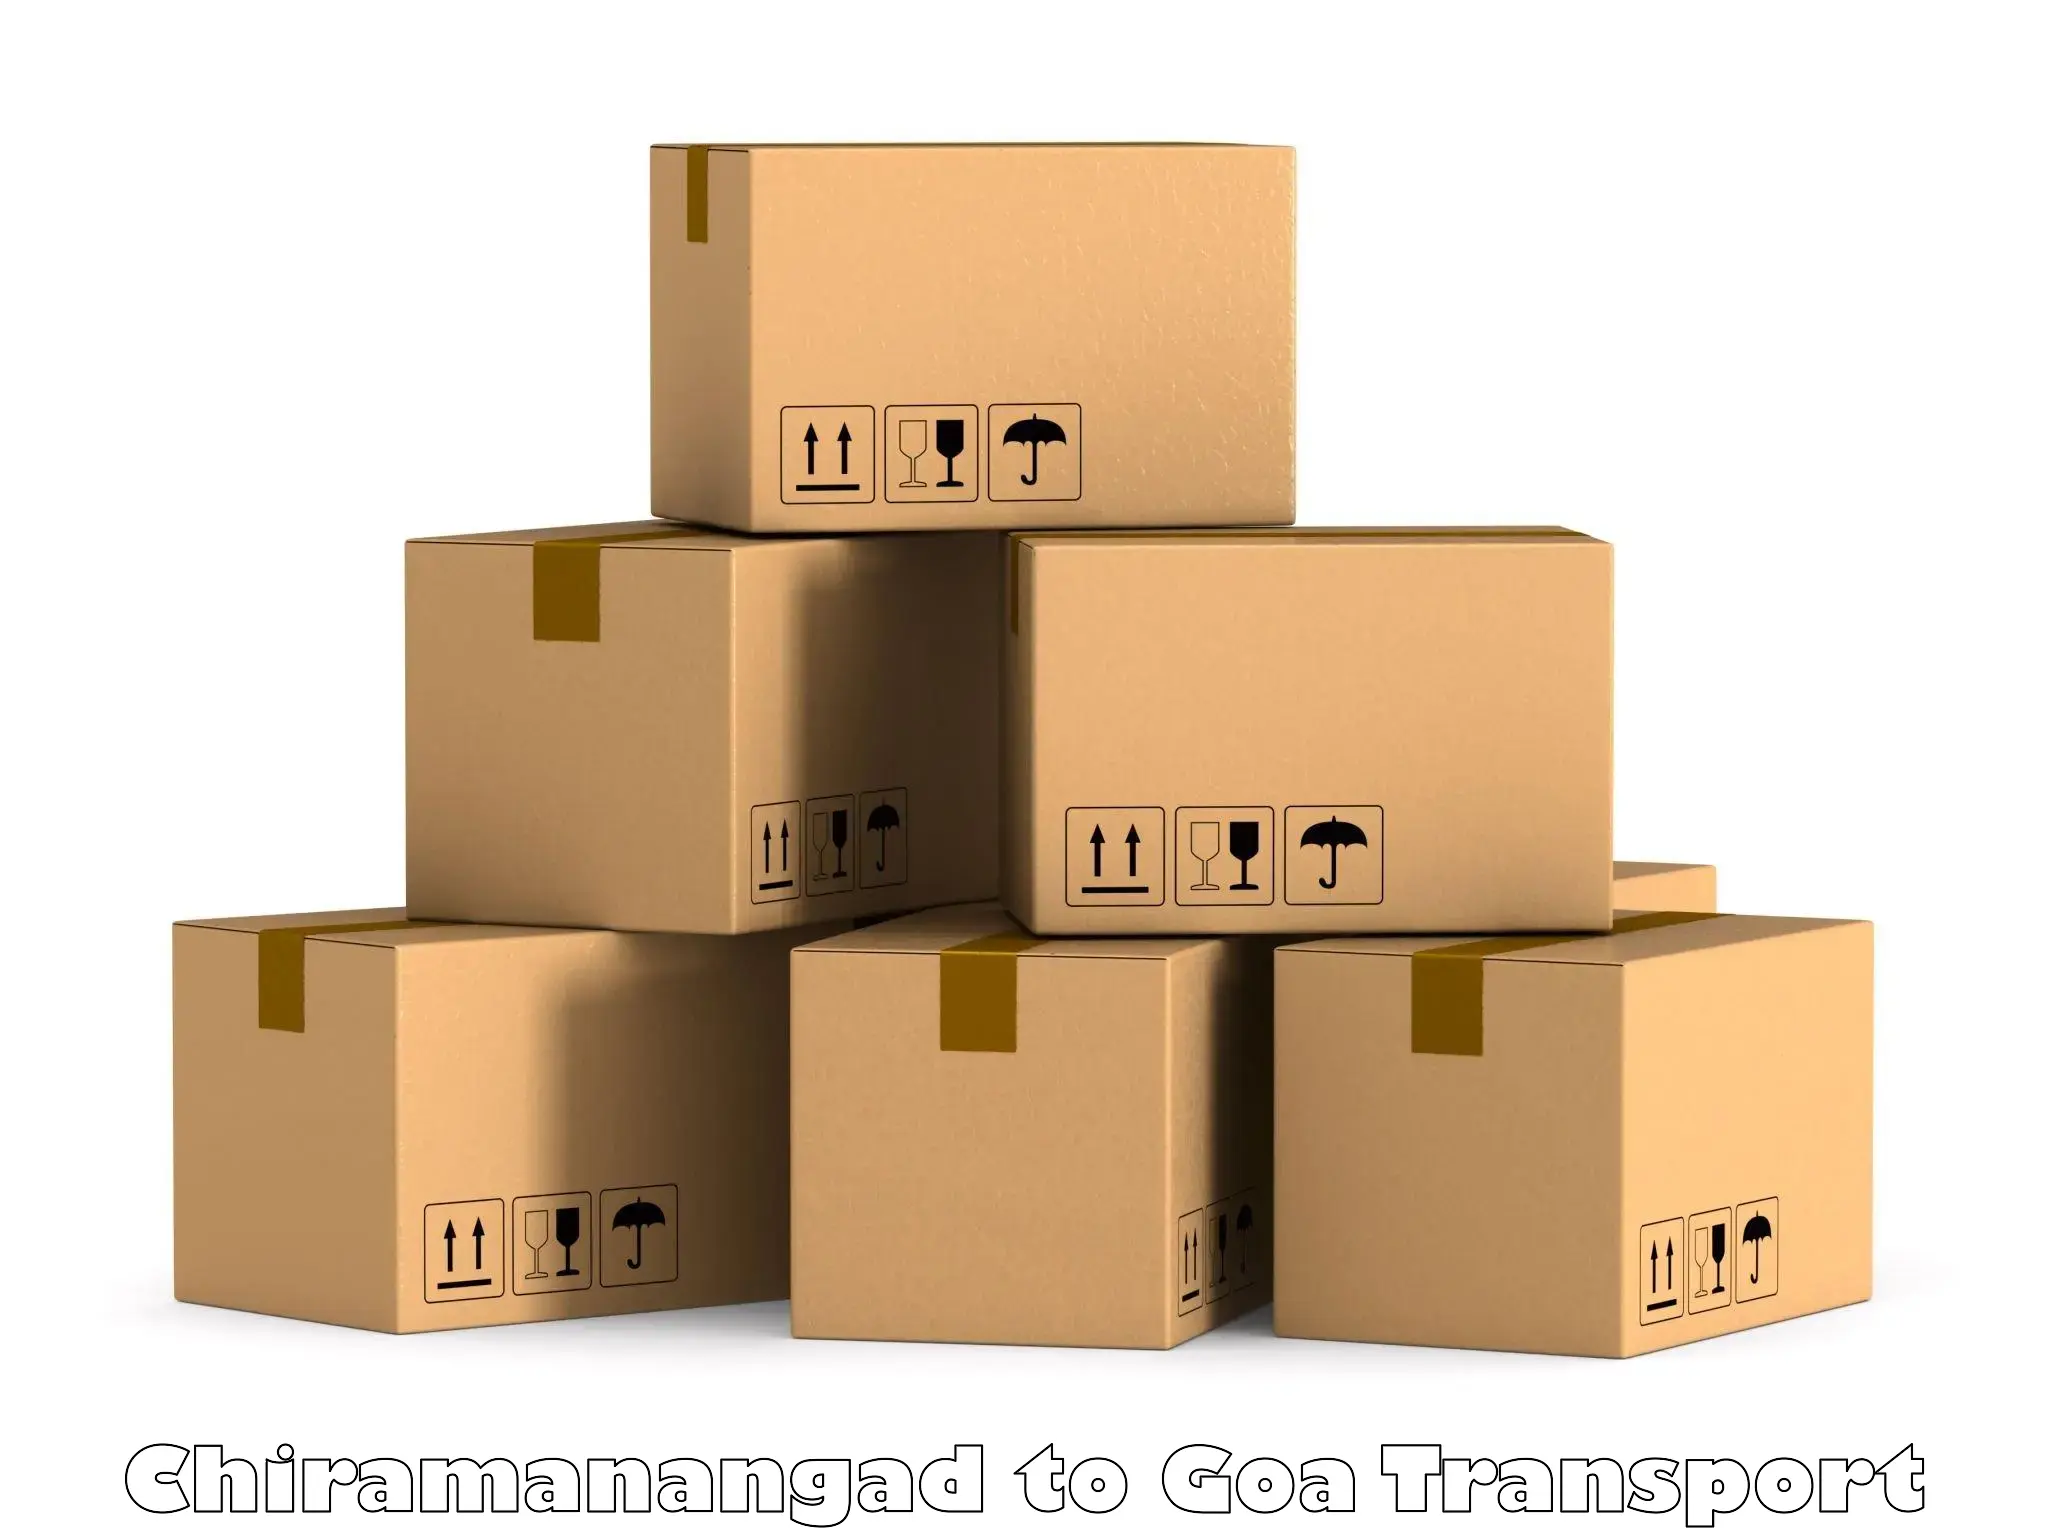 Air freight transport services Chiramanangad to NIT Goa